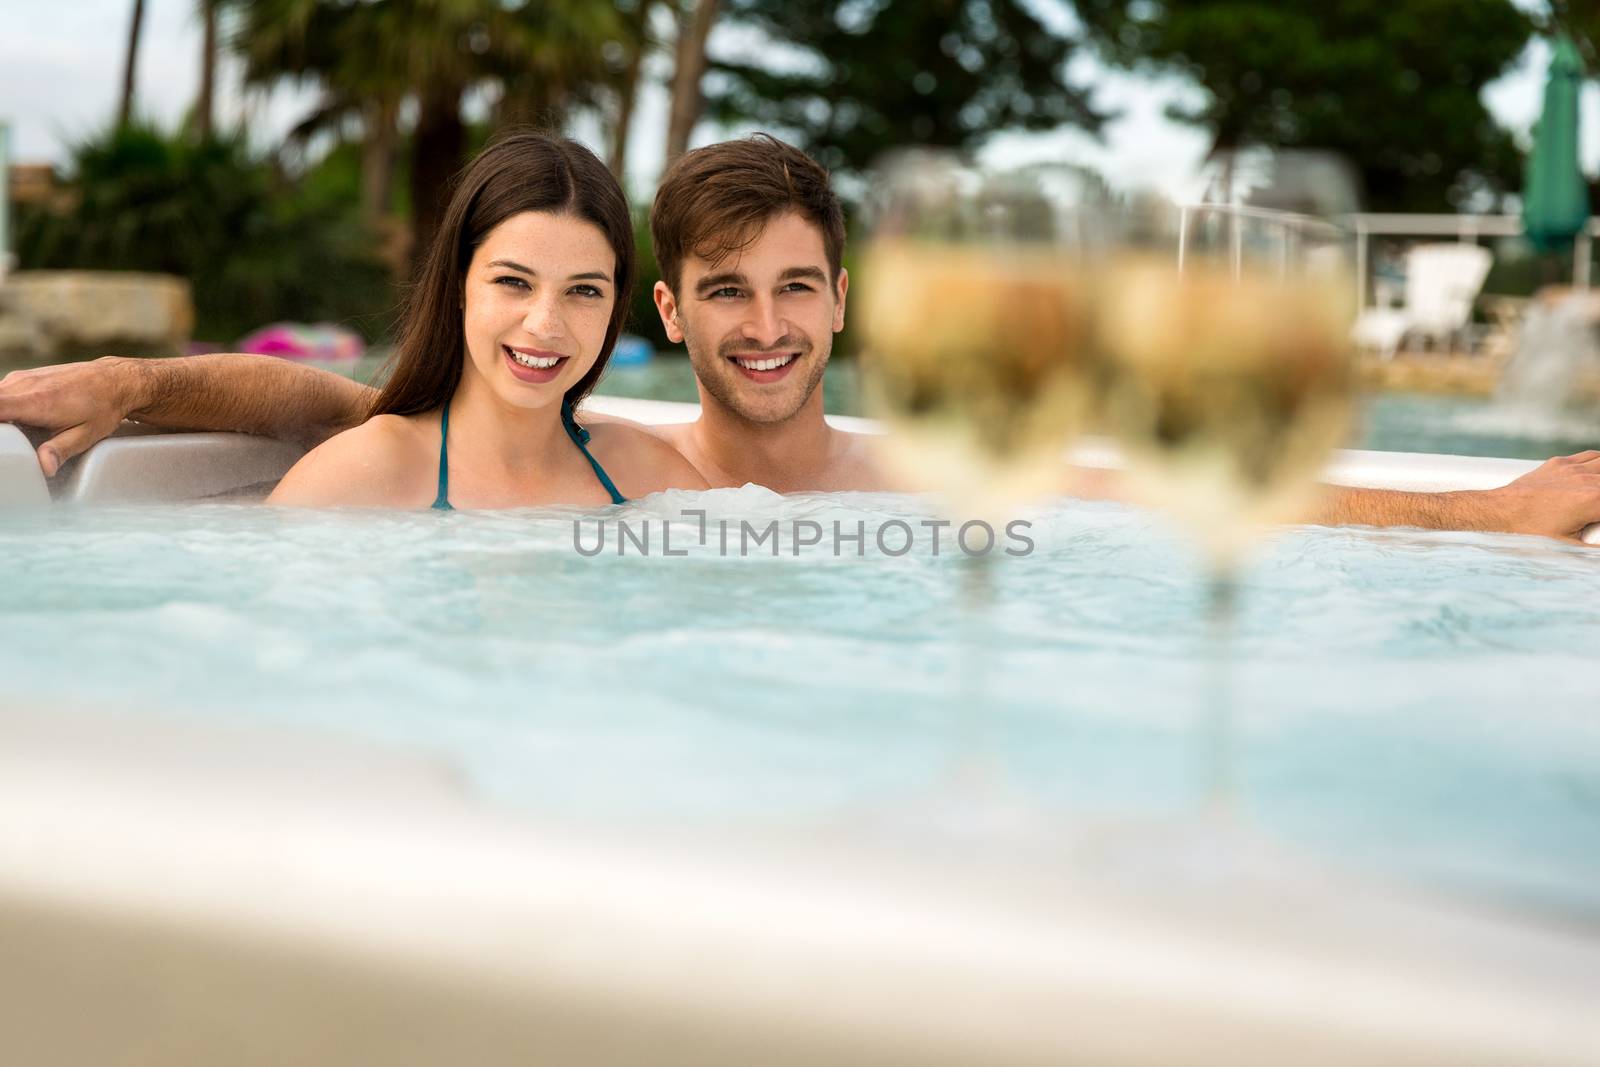 Young couple inside a jacuzzi and tasting wine